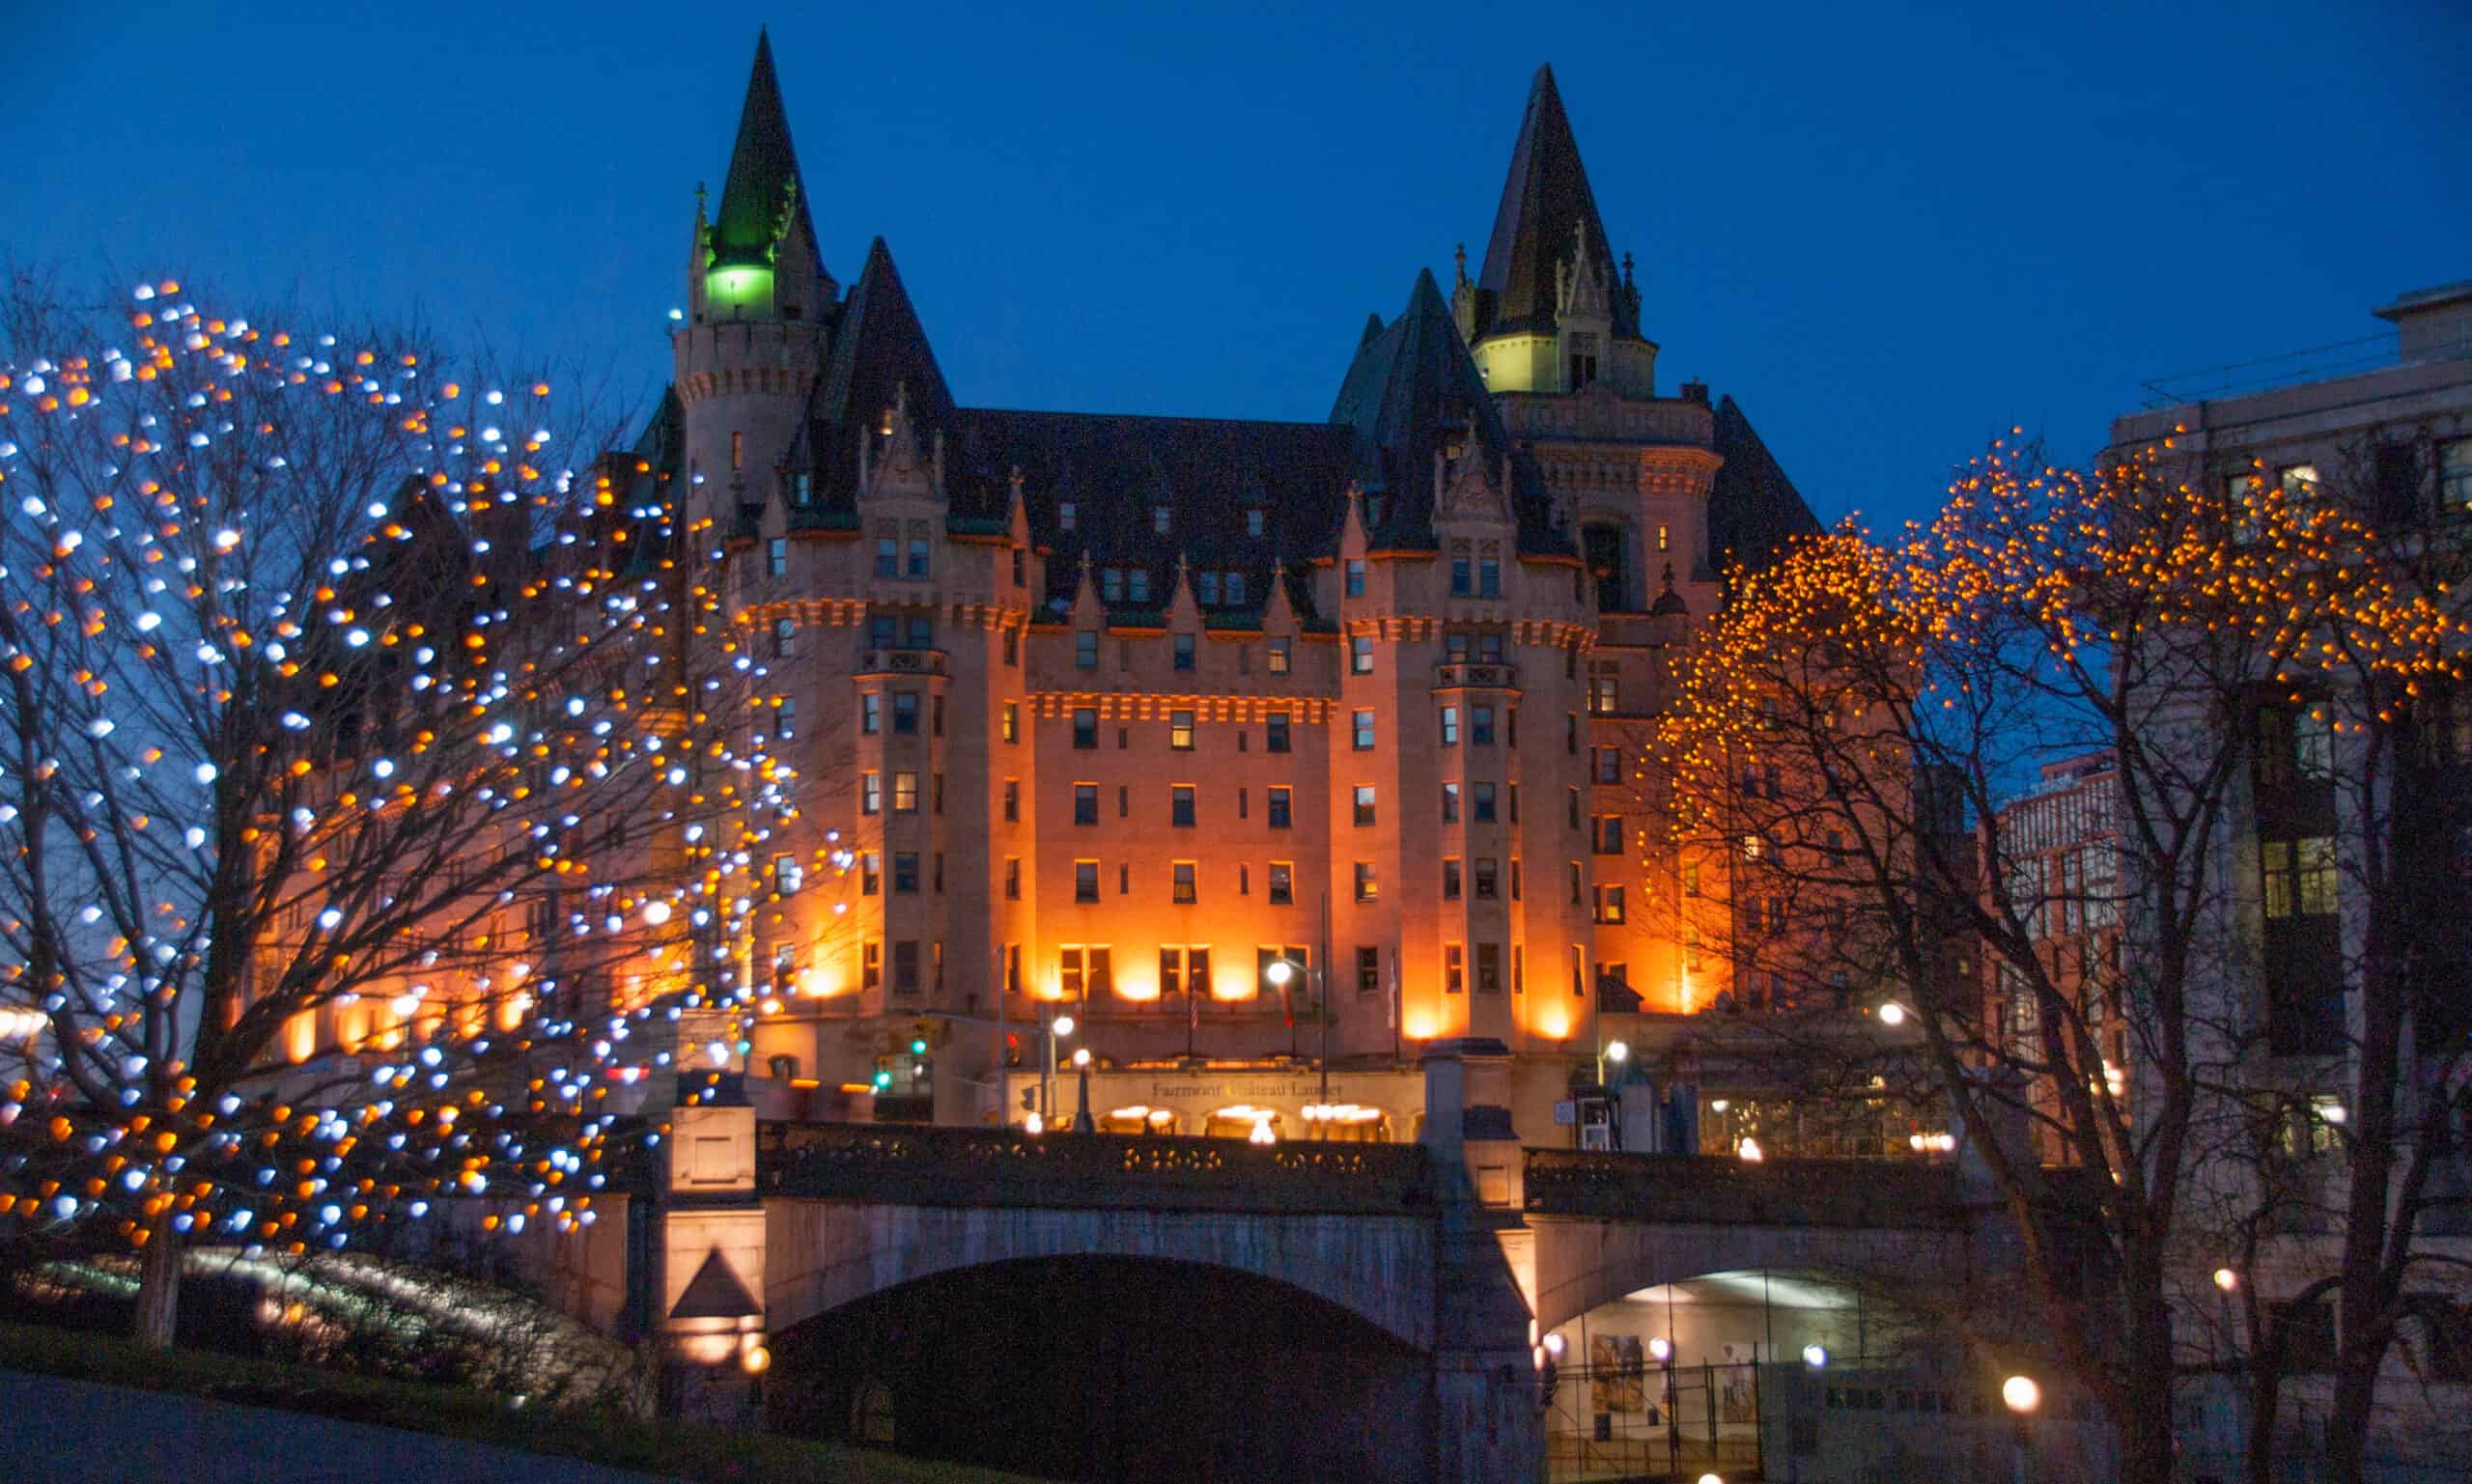 Chateau Laurier in Ottawa